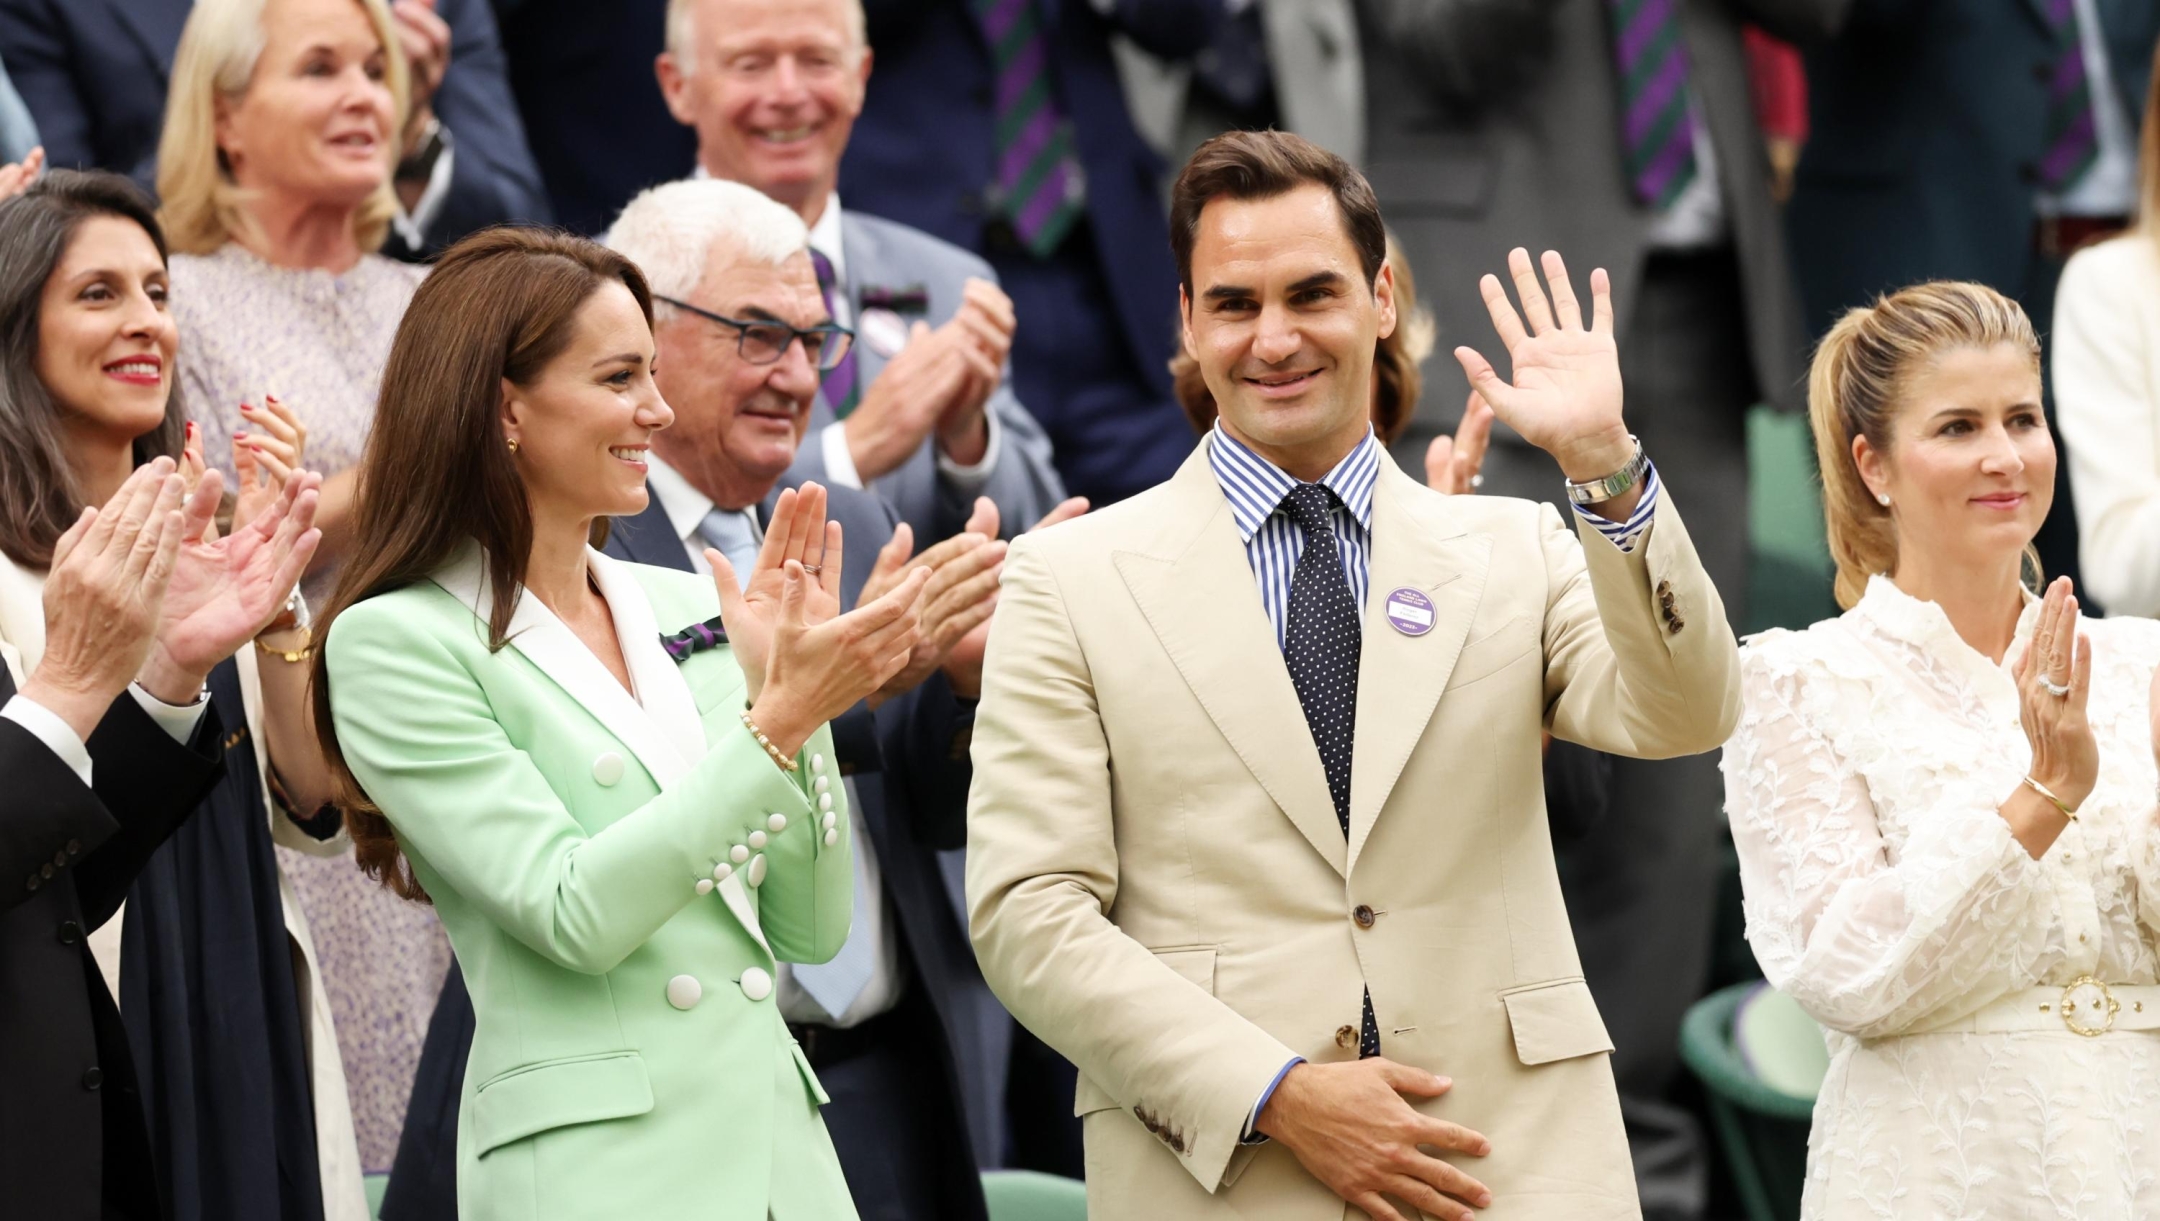 LONDON, ENGLAND - JULY 04: Former Wimbledon Champion, Roger Federer of Switzerland interacts with Catherine, Princess of Wales as he is honoured in the Royal Box prior to the Women's Singles first round match between Shelby Rogers of United States and Elena Rybakina of Kazakhstan during day two of The Championships Wimbledon 2023 at All England Lawn Tennis and Croquet Club on July 04, 2023 in London, England. (Photo by Clive Brunskill/Getty Images)